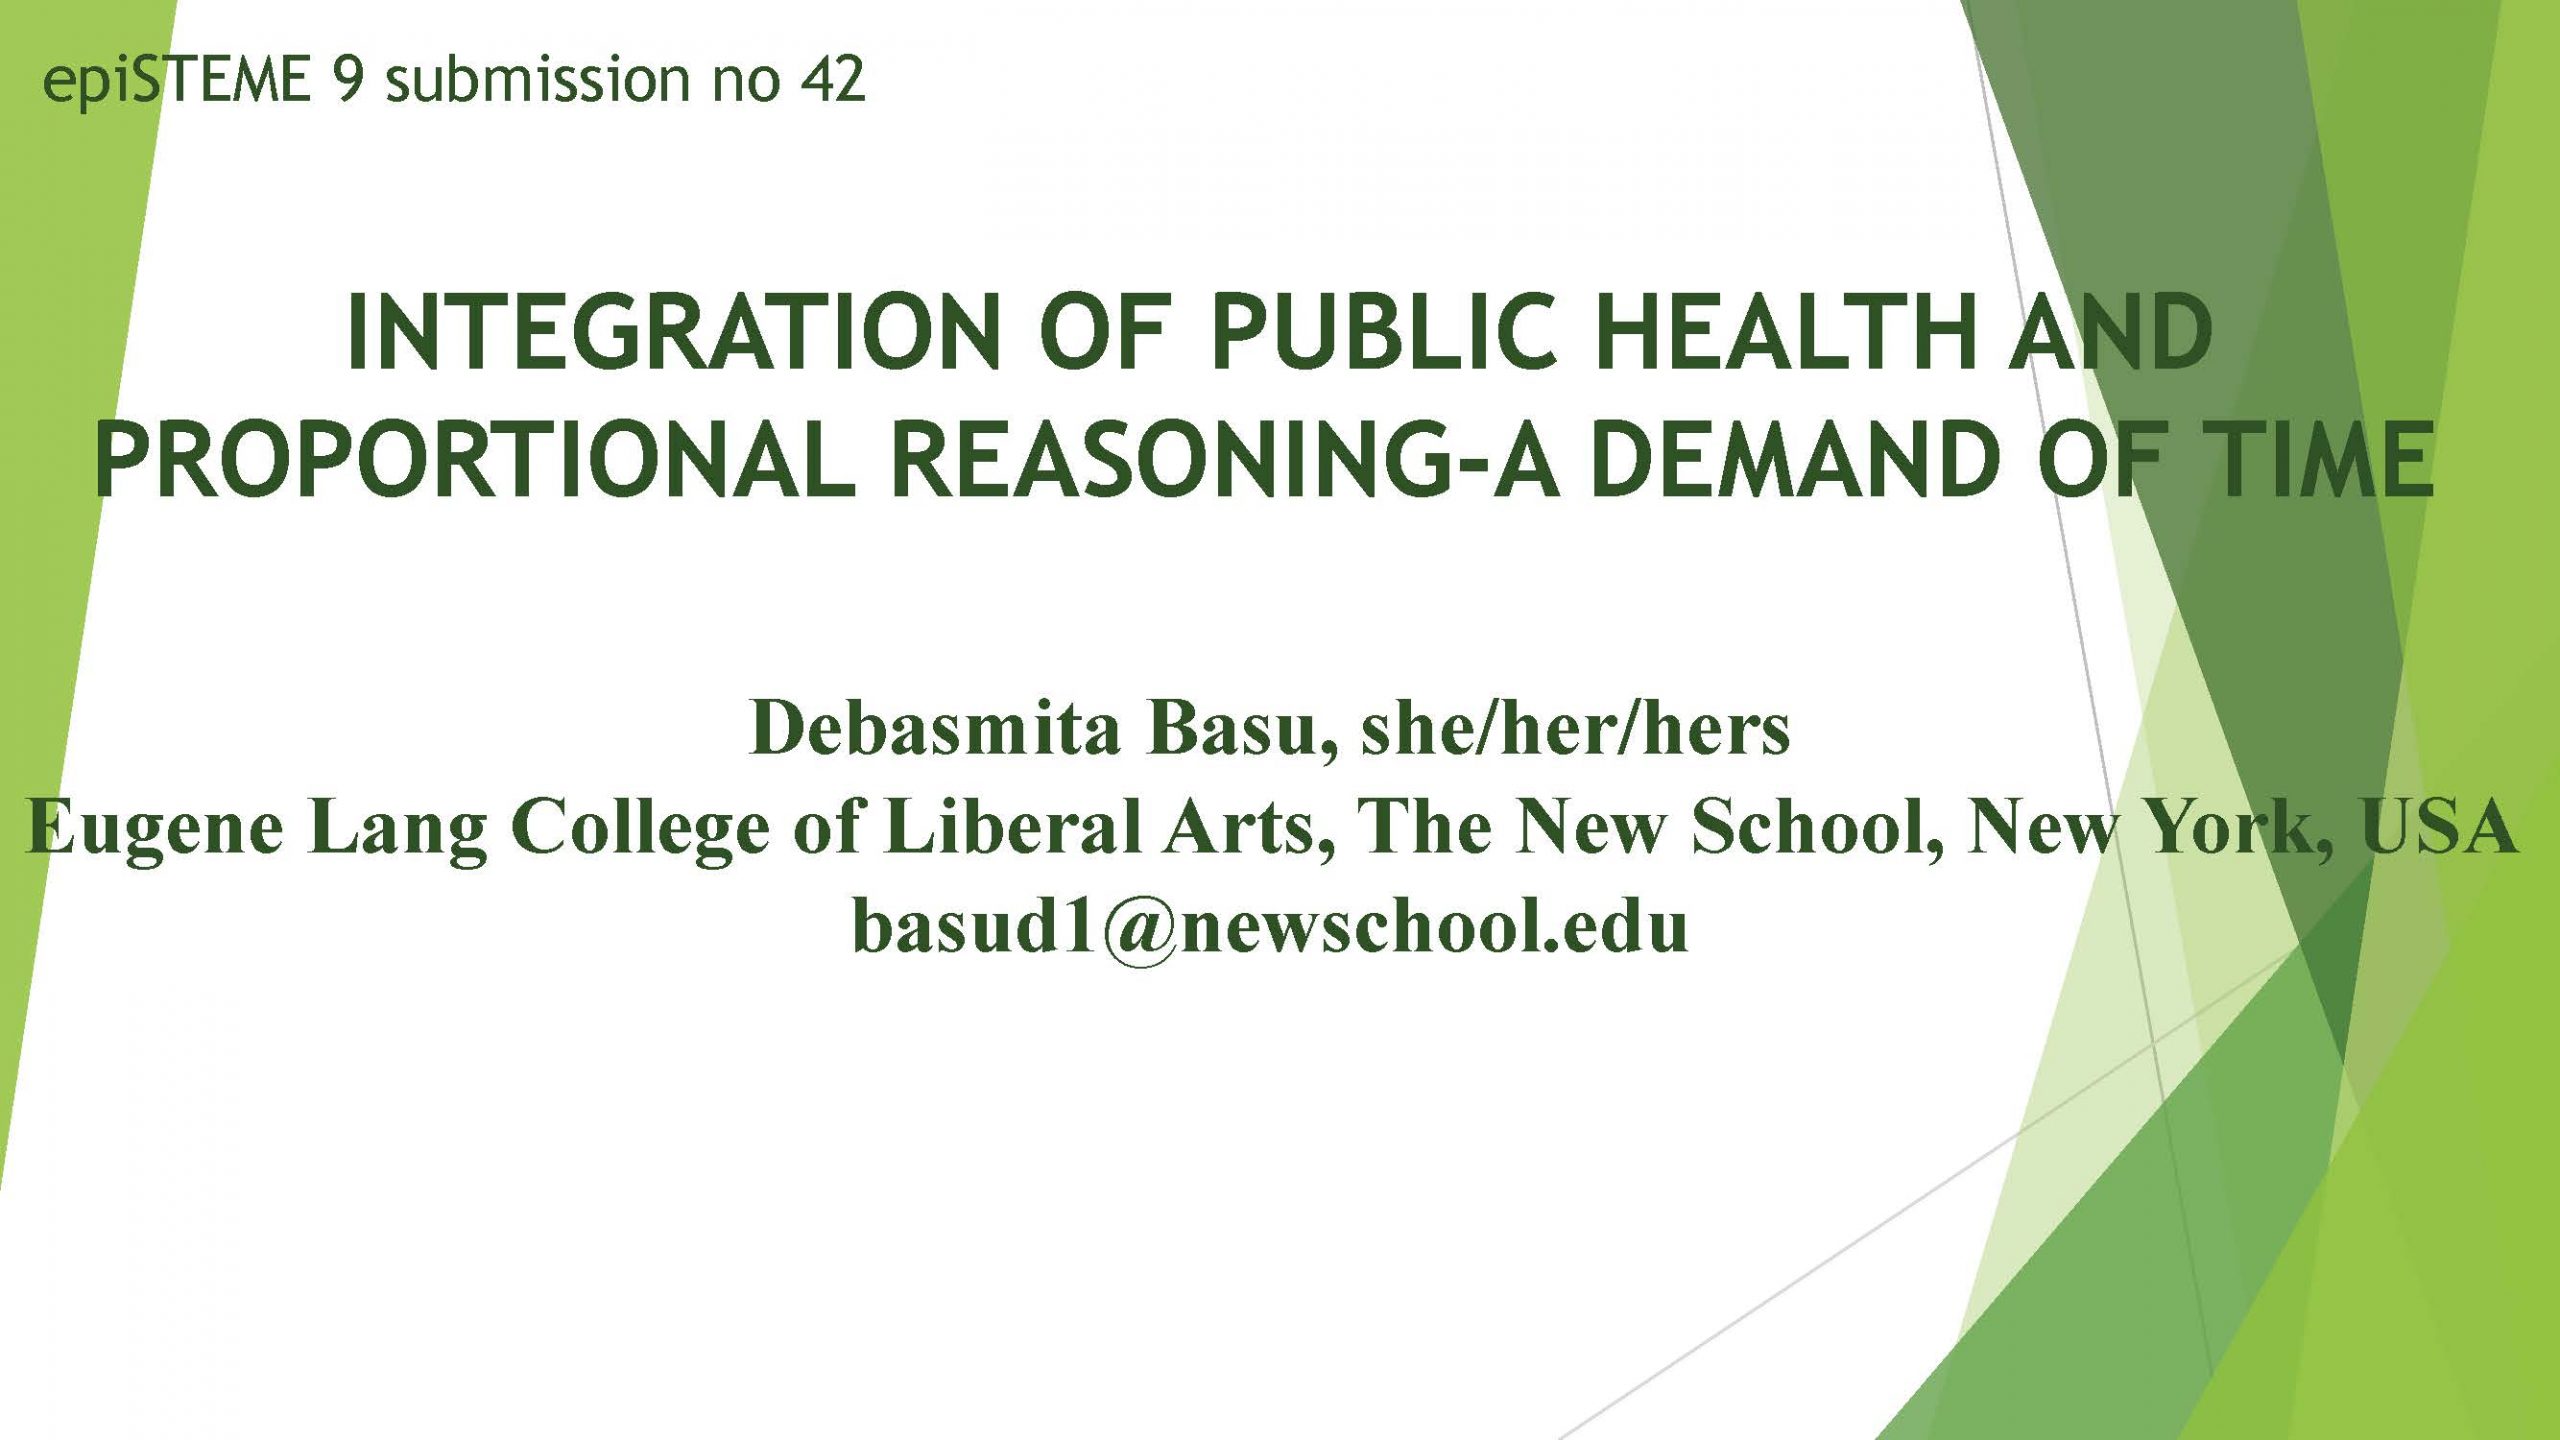 Integration of Public Health and Proportional Reasoning-A Demand of Time